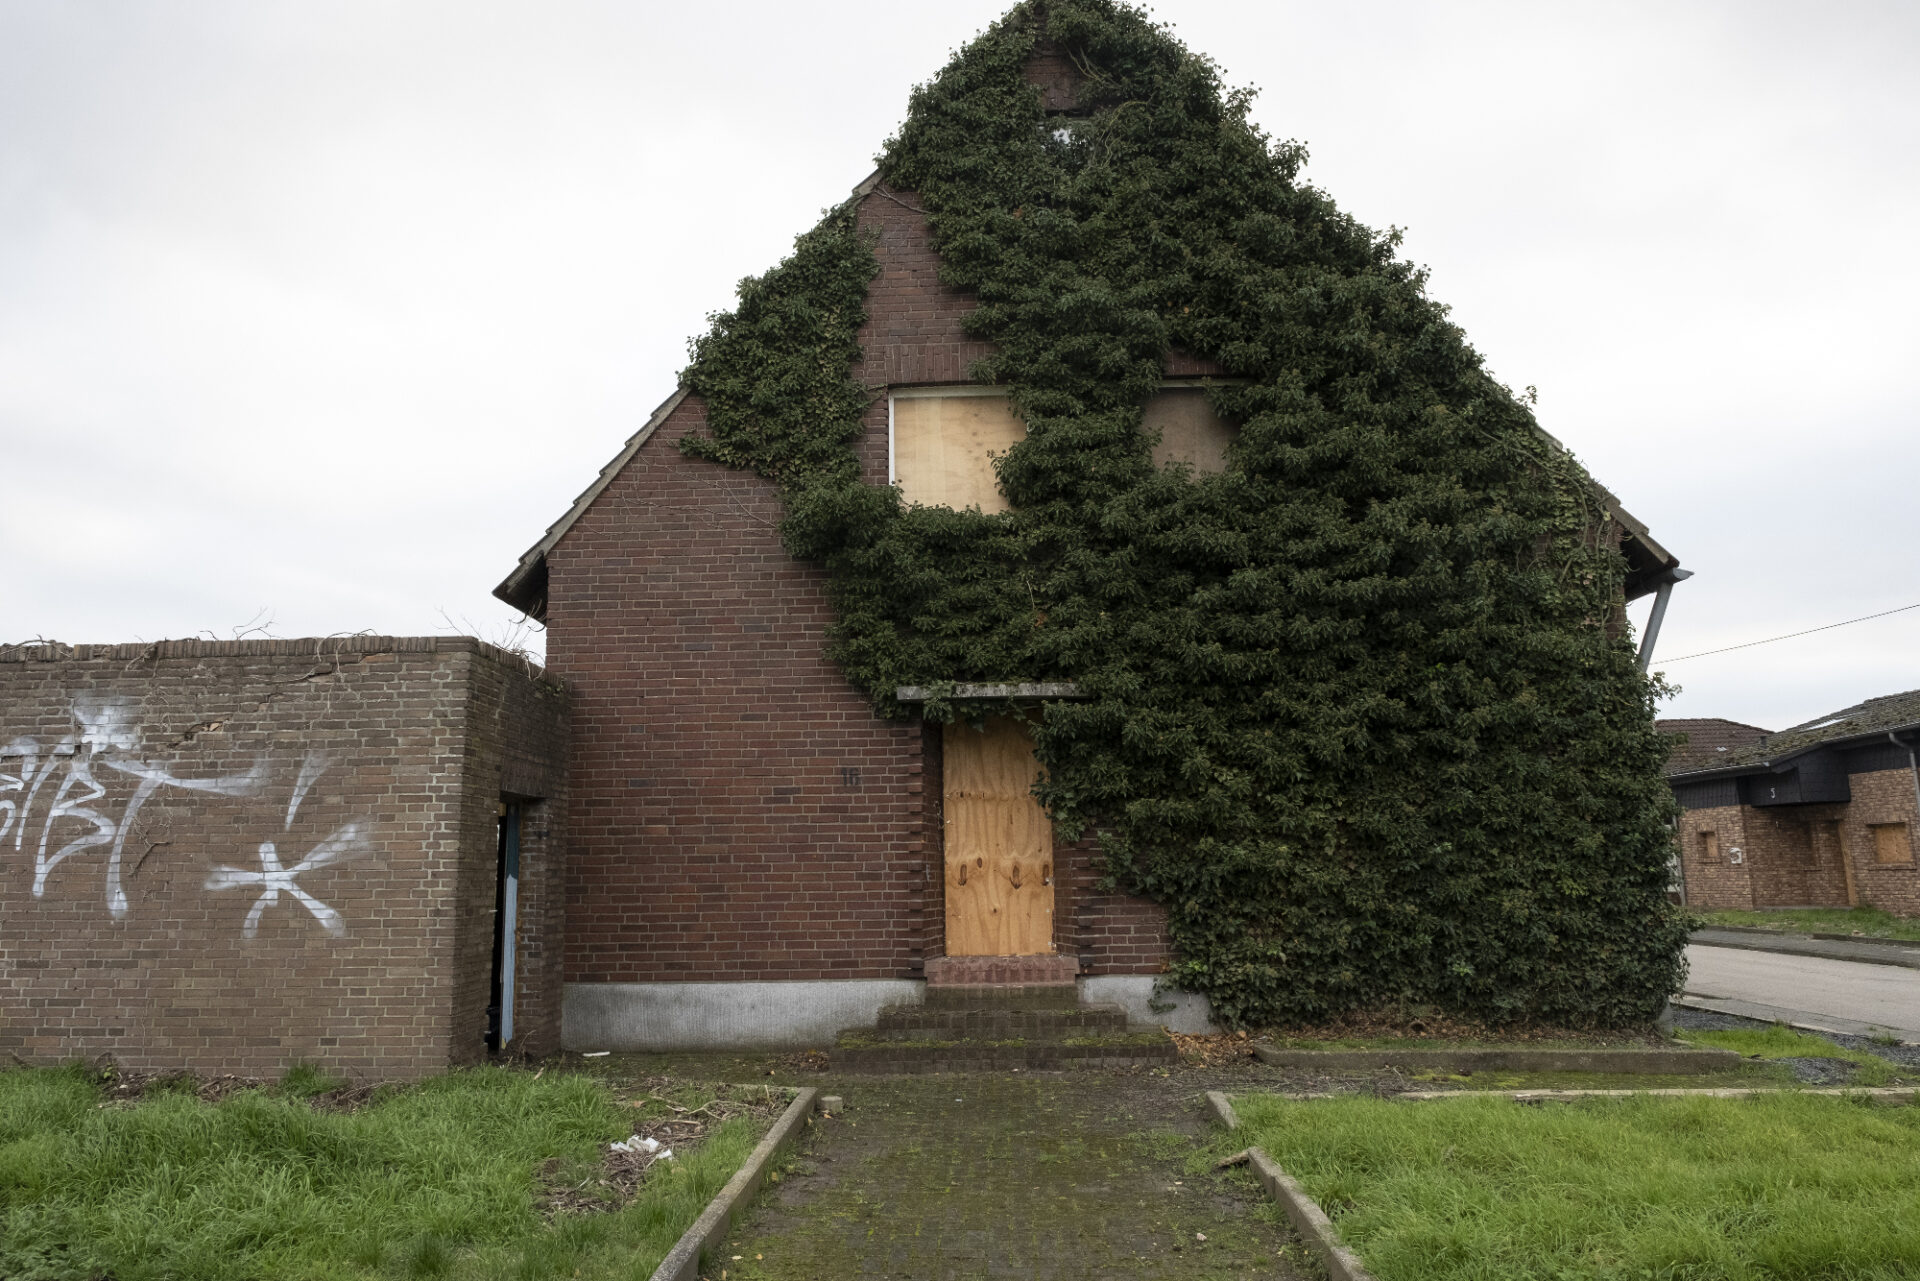 Condemned House, Old Morschenich, North-Rhine Westphalia, Germany, 2019, Alan Gignoux